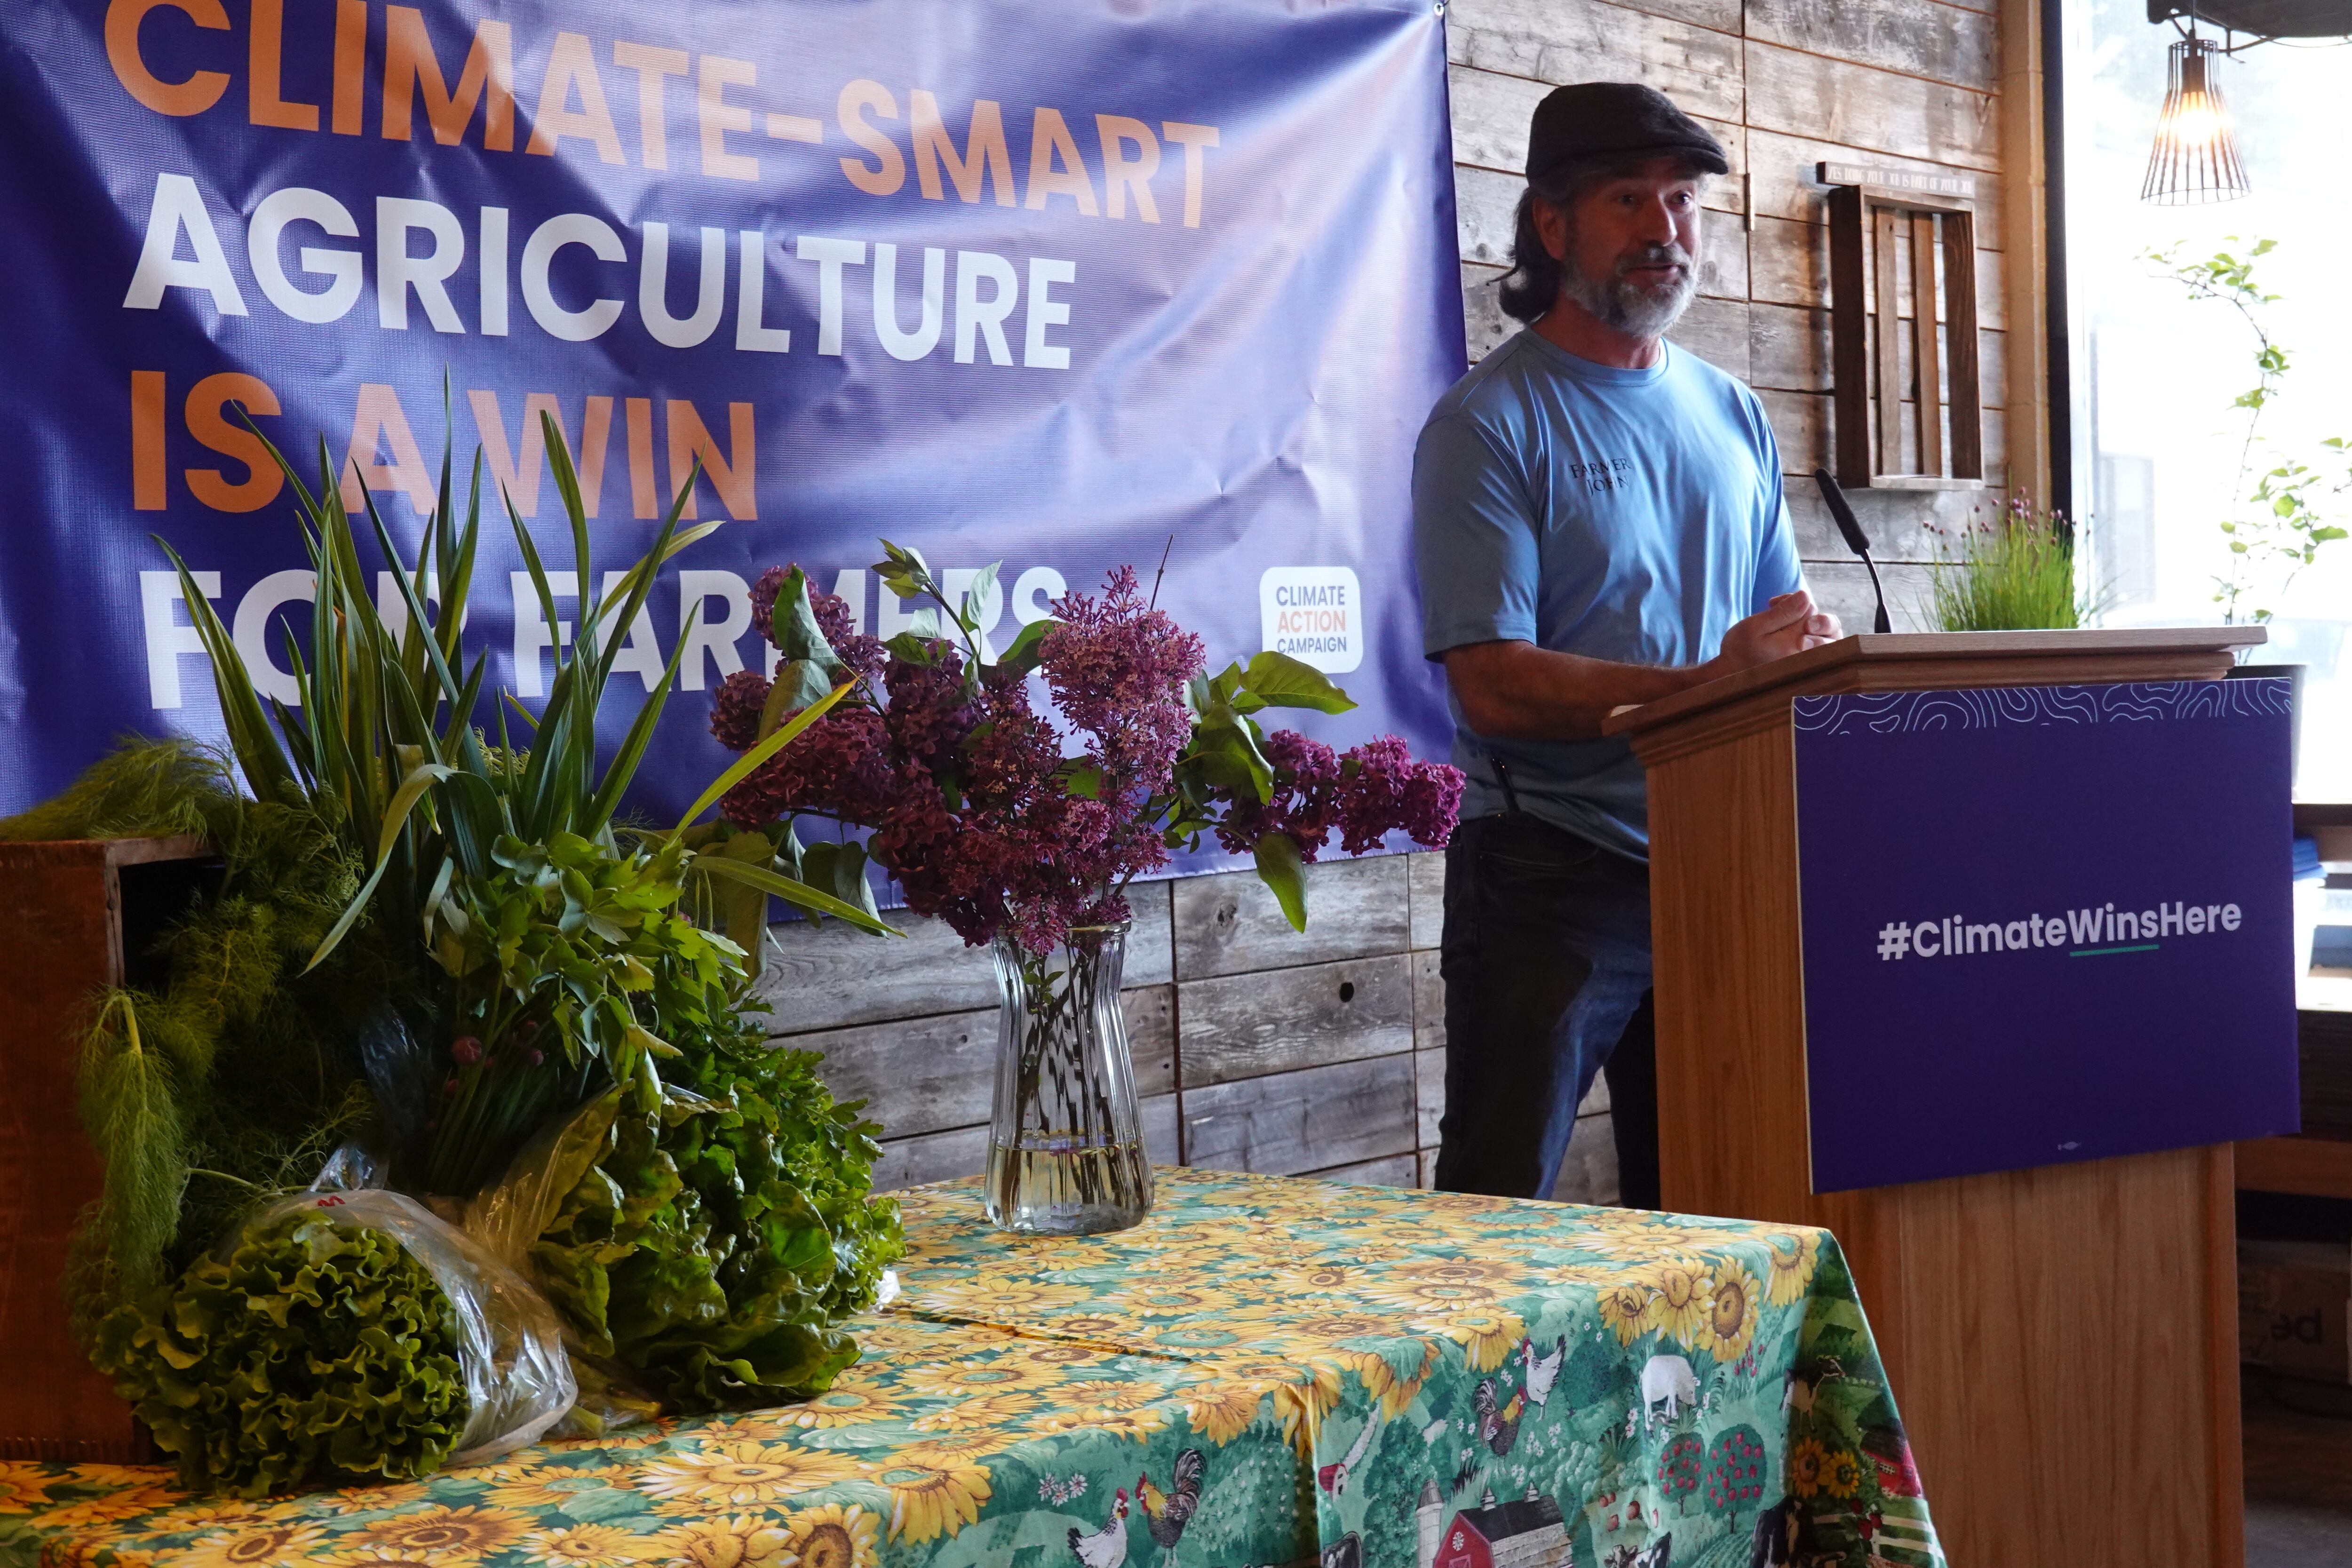 John Spencer, who runs Get To-Gather Farm, at a press event where a group of Southwest Washington farmers called on federal legislators to keep conservation and climate resilience funds in the farm bill.